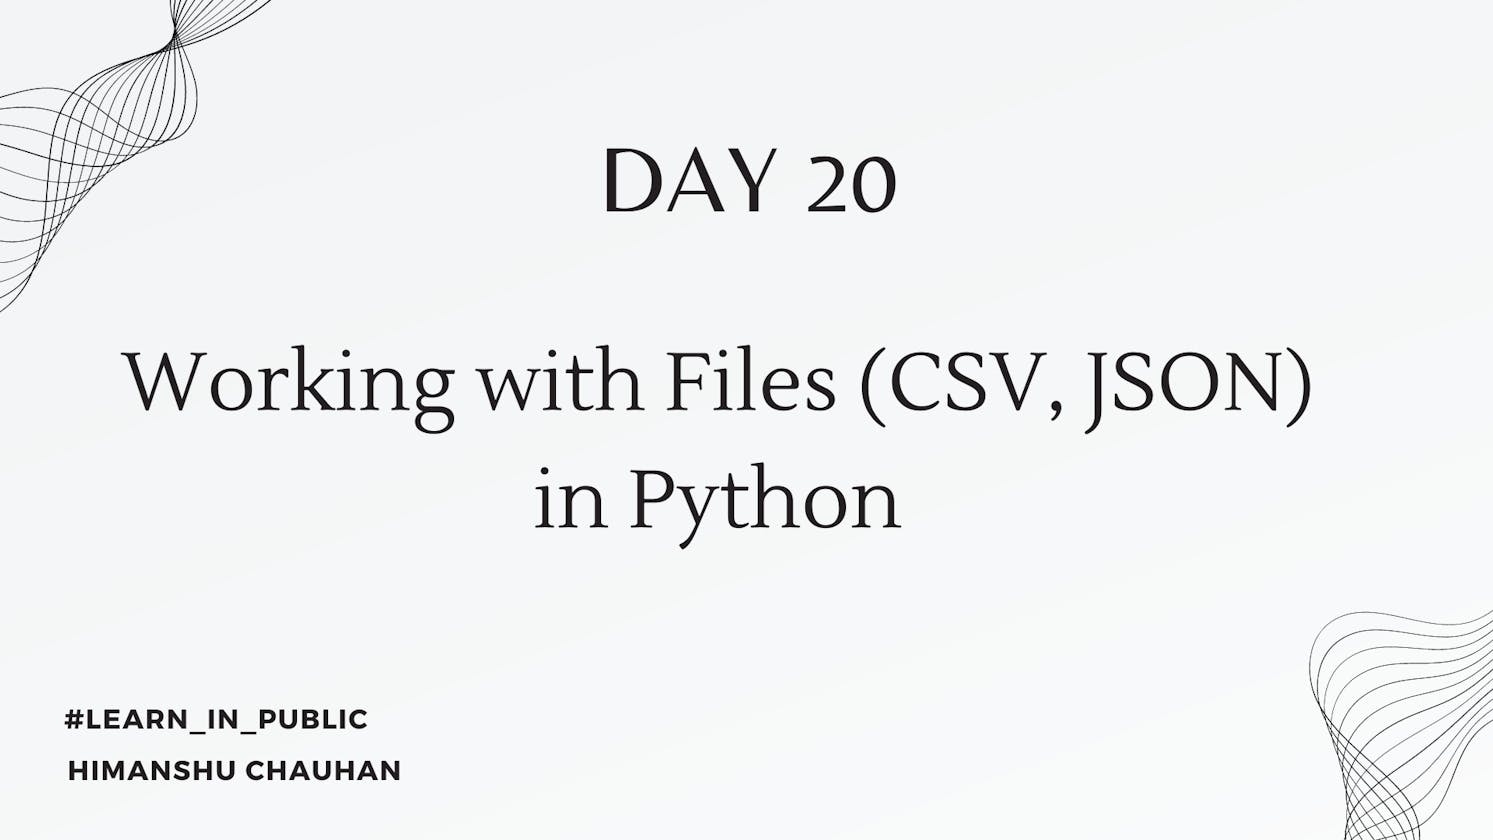 Day 20: Working with Files (CSV, JSON) in Python